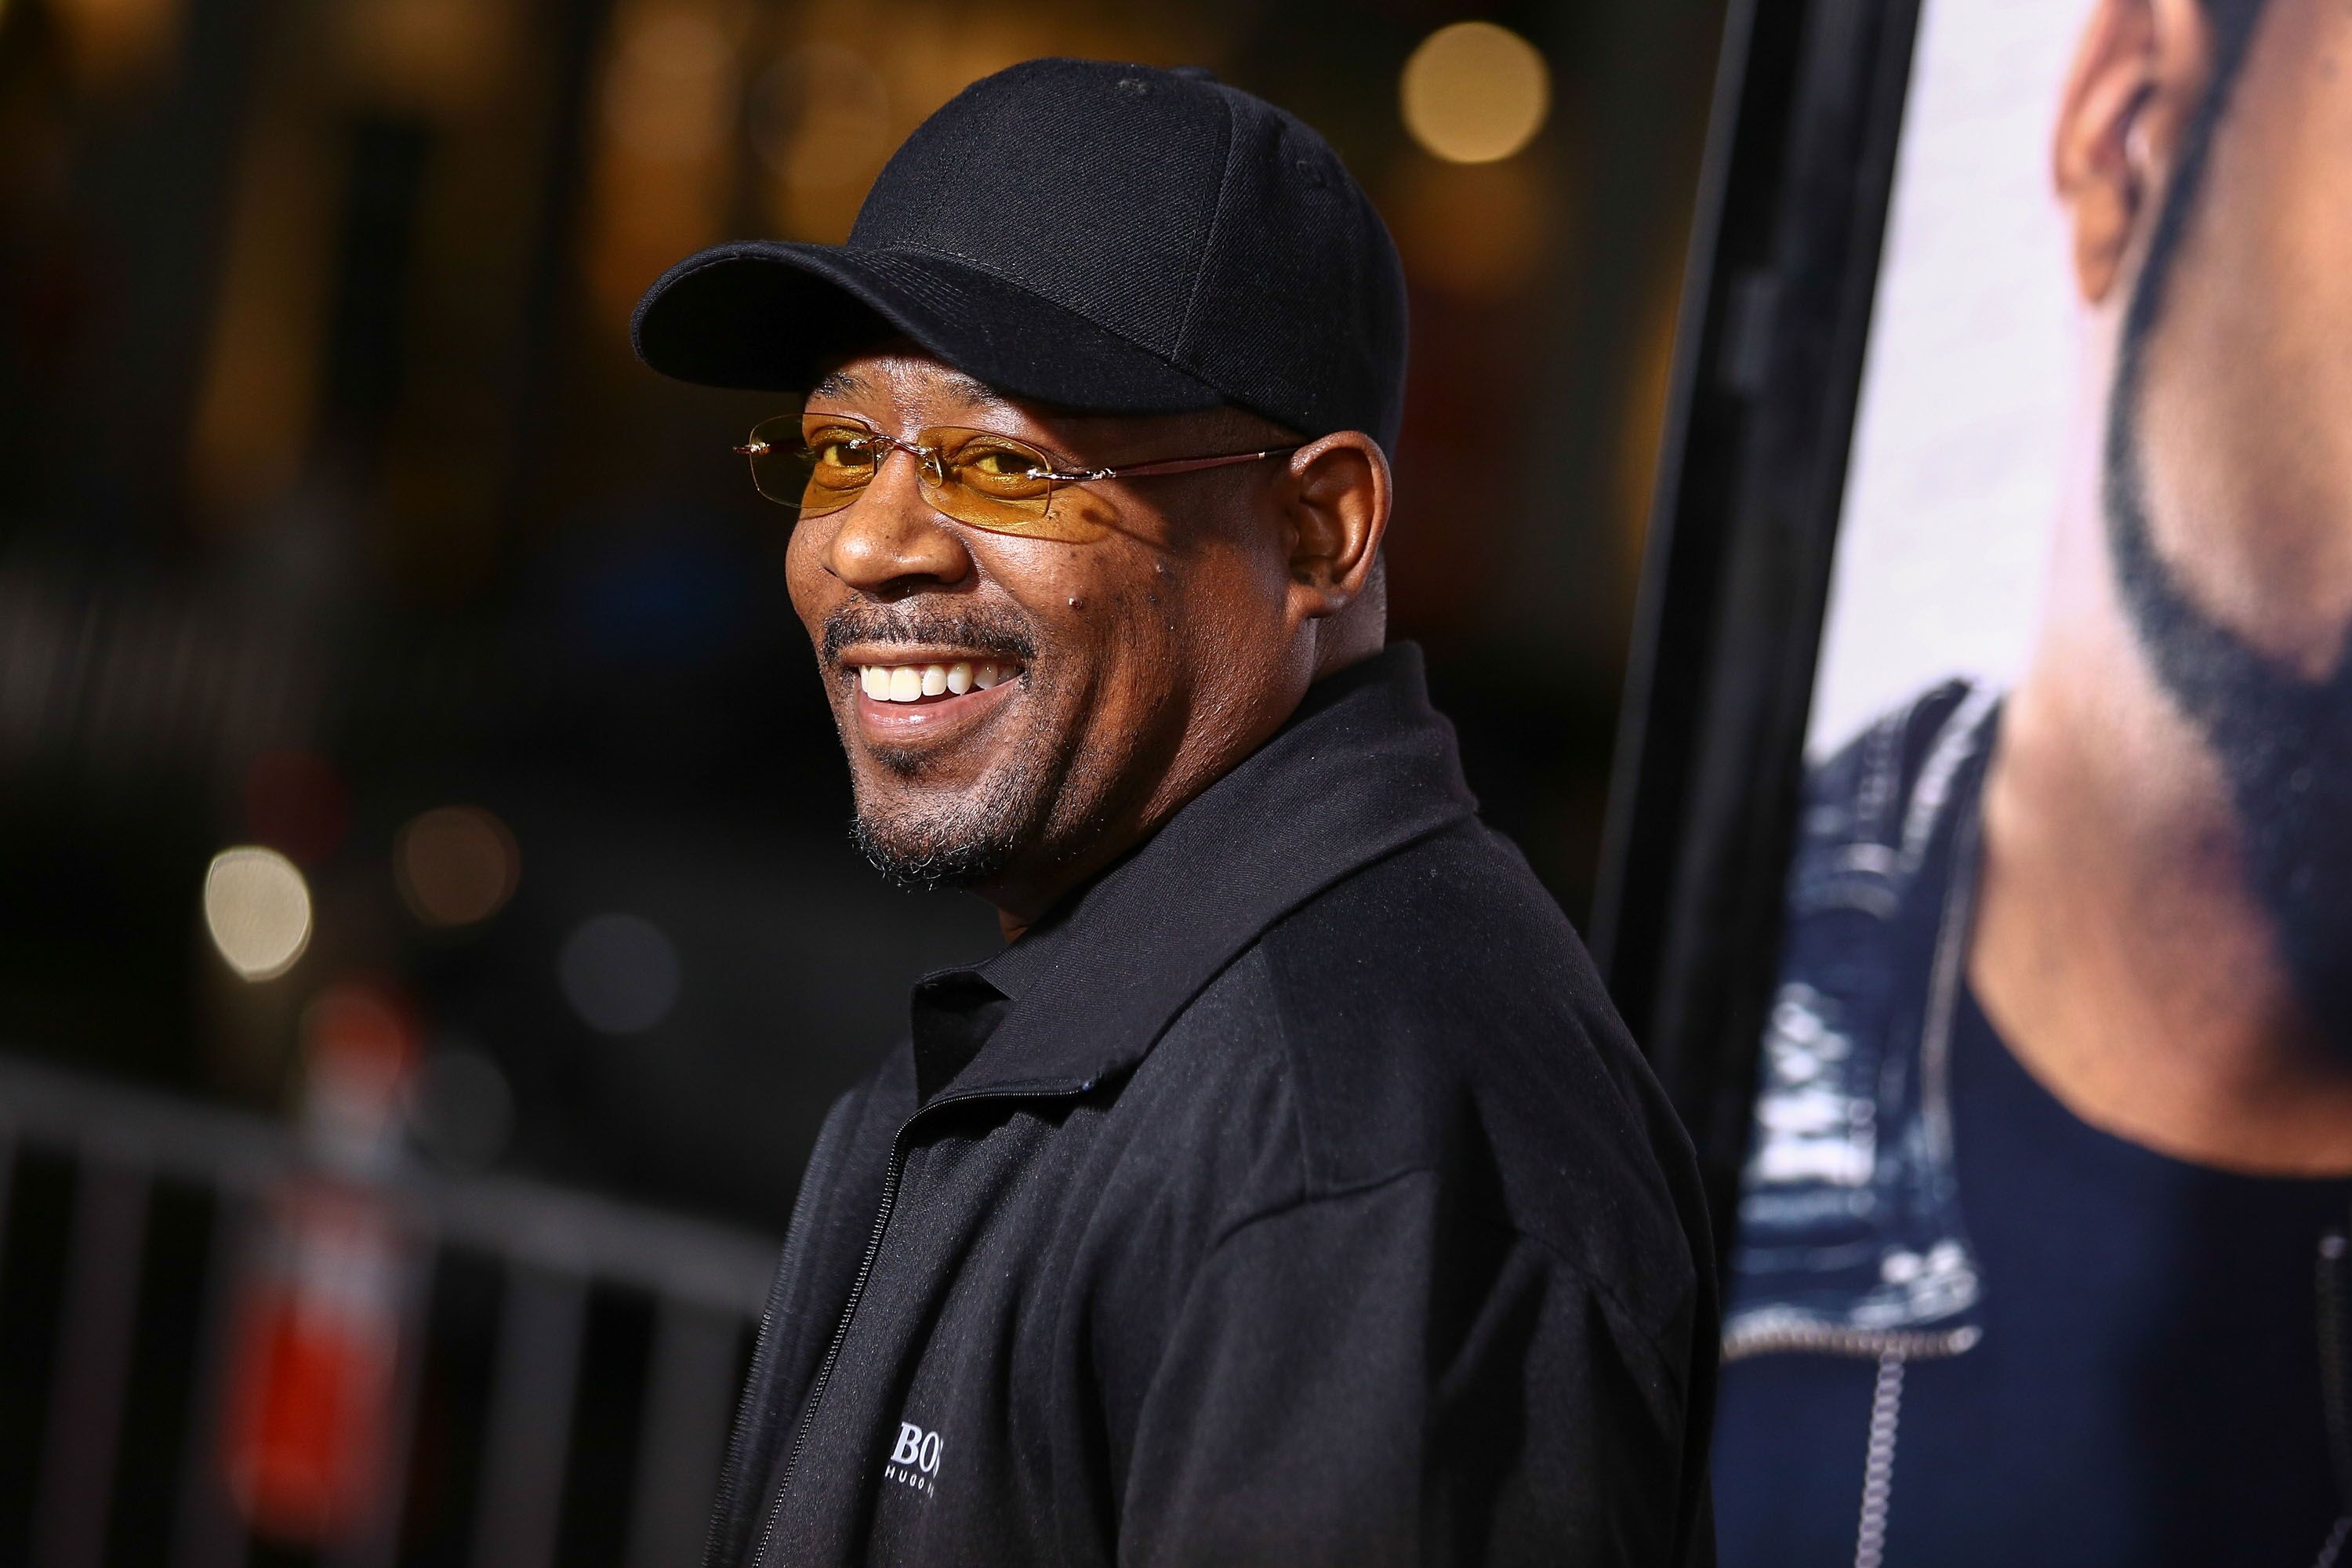 Martin Lawrence attending a movie premiere | Source: Getty Images/GlobalImagesUkraine